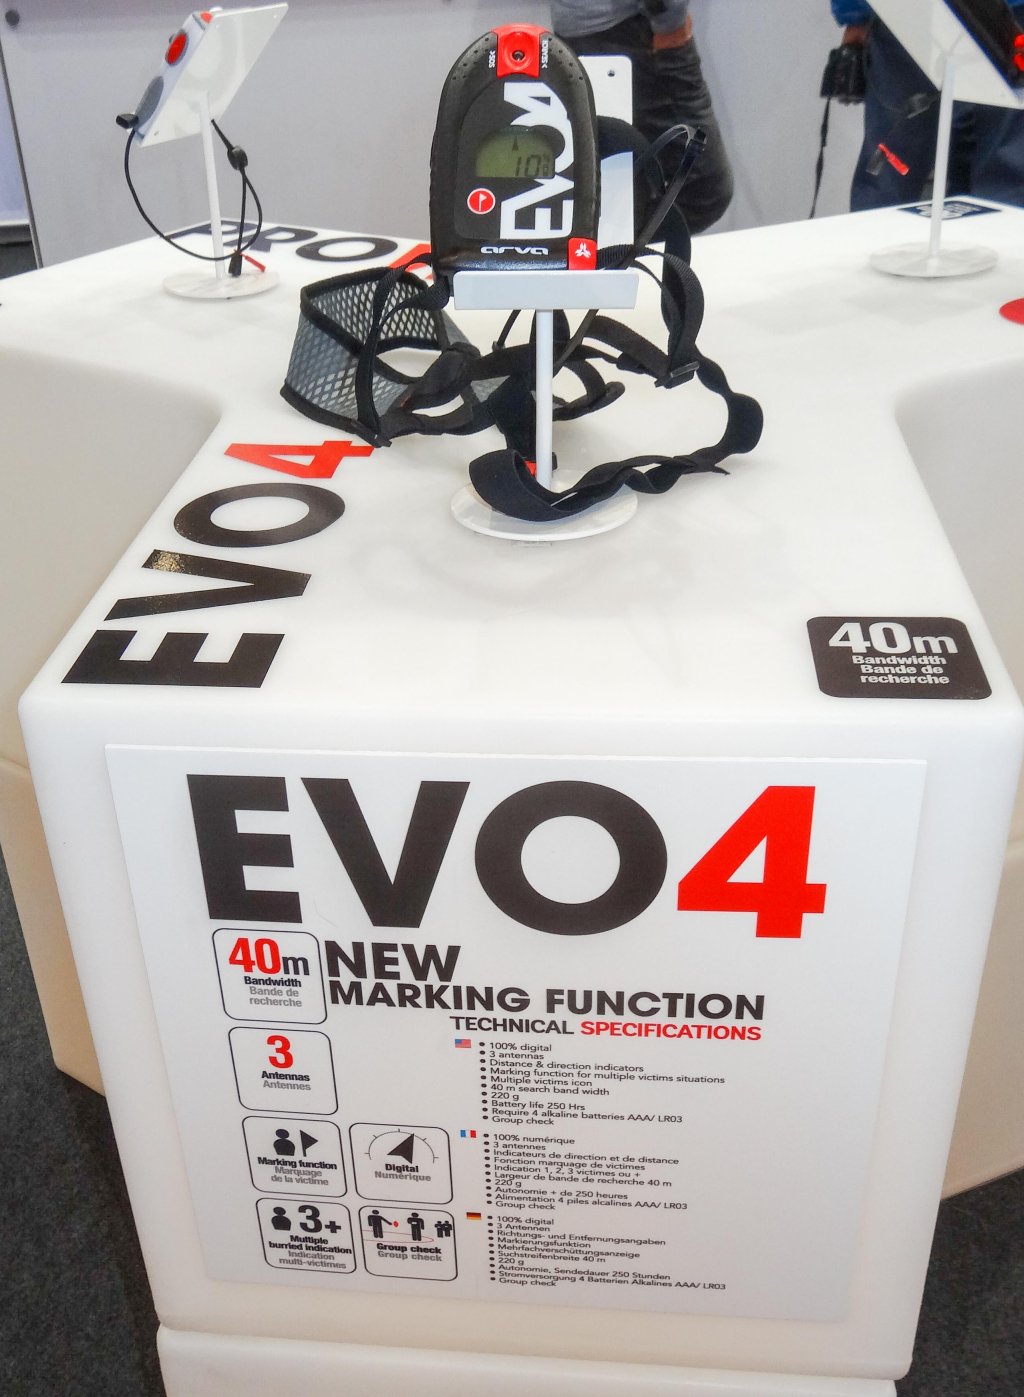 The Evo4 is the successor to the Evo3 avalanche transceiver from Arva. Unlike its predecessor, the newly developed device software (firmware) is designed to enable reliable marking in all situations.